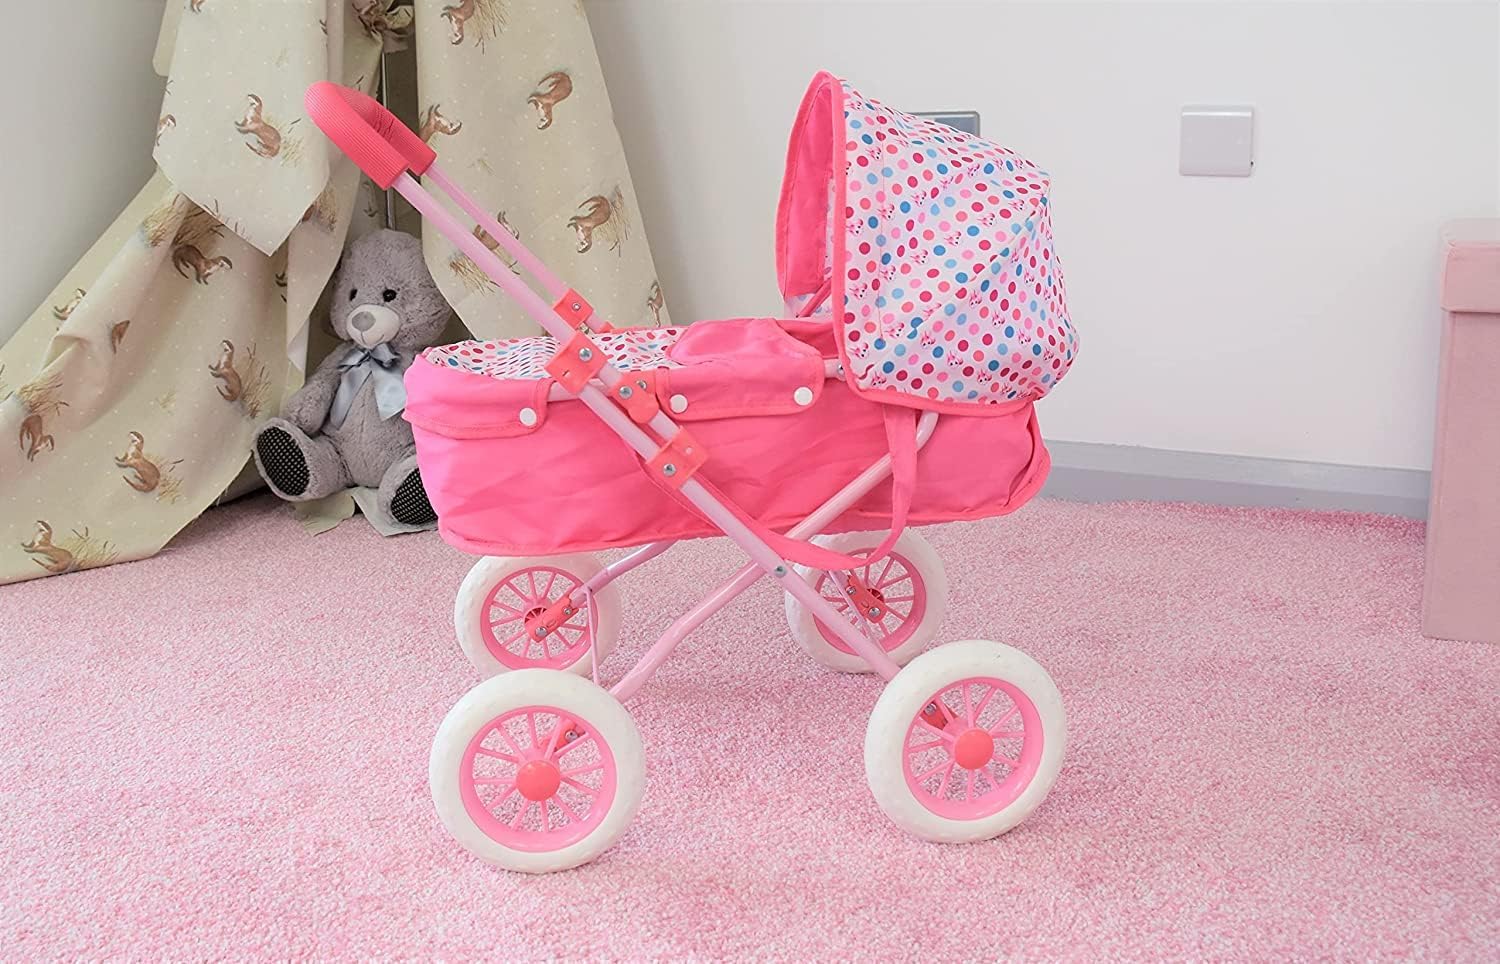 KOOKAMUNGA KIDS Baby Doll Stroller - Realistic 2 in 1 Baby Stroller for Dolls w/Detachable Bassinet – Toy Pram w/Carry Cot, Retractable Canopy & Soft Grip Handle - for Dolls up to 18" - Pink